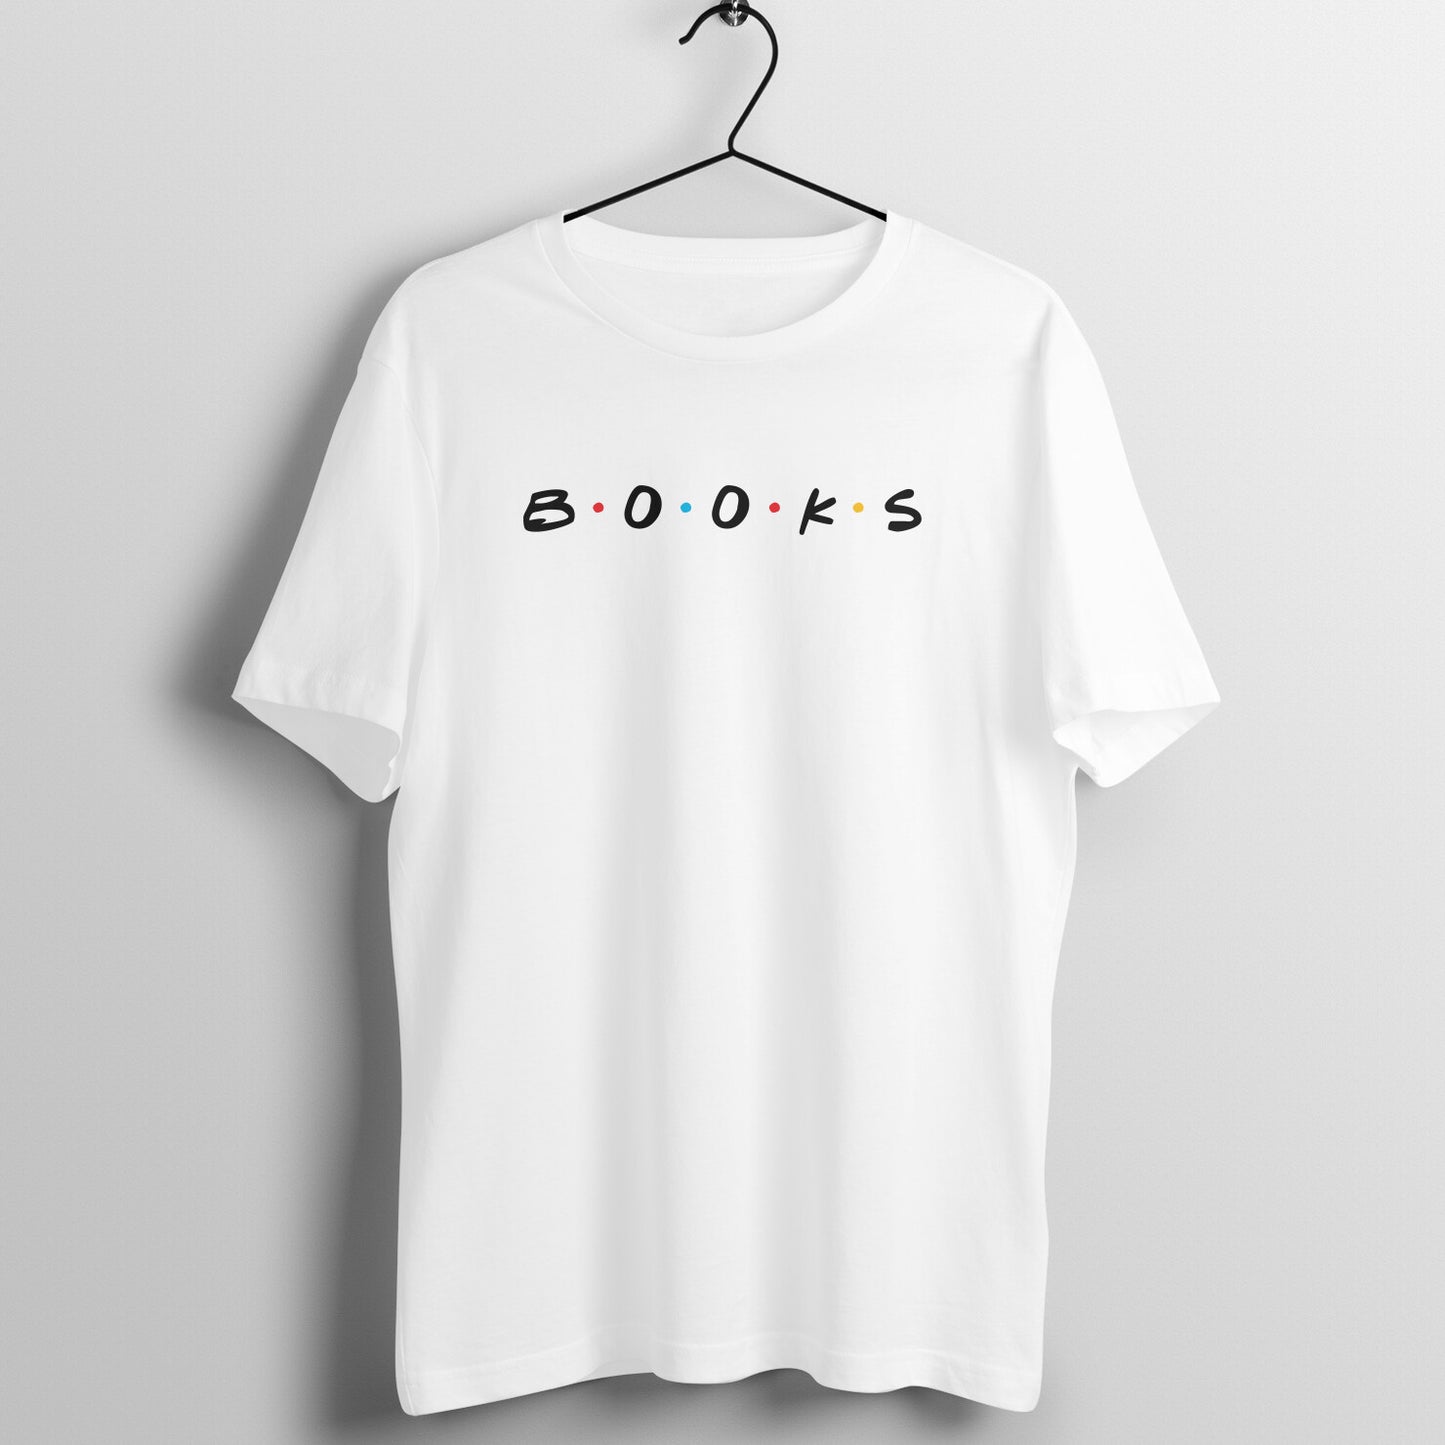 FRIENDS Tshirt for Book Lovers